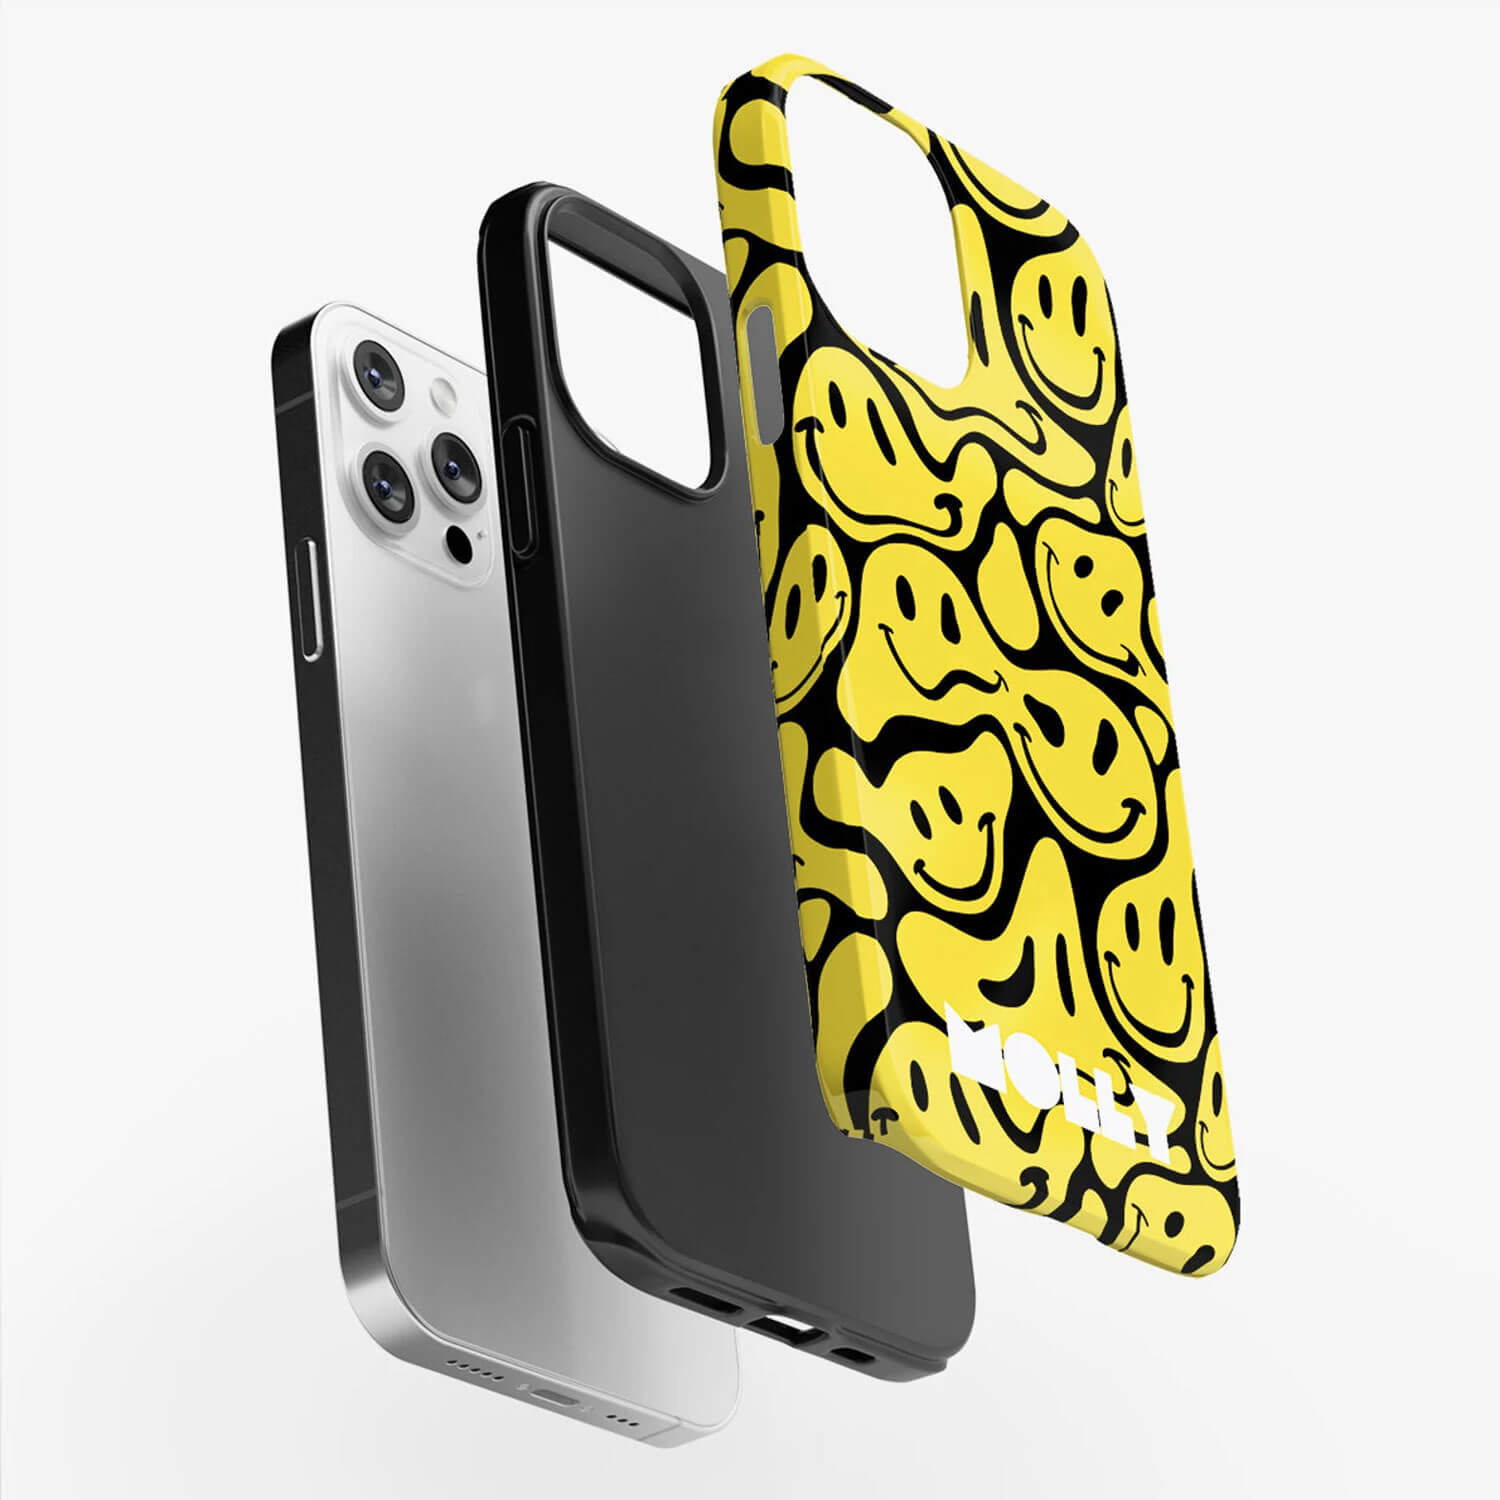 Wrappz phone case with a pattern of melted yellow smiley faces on a black background with a personalised name in white.